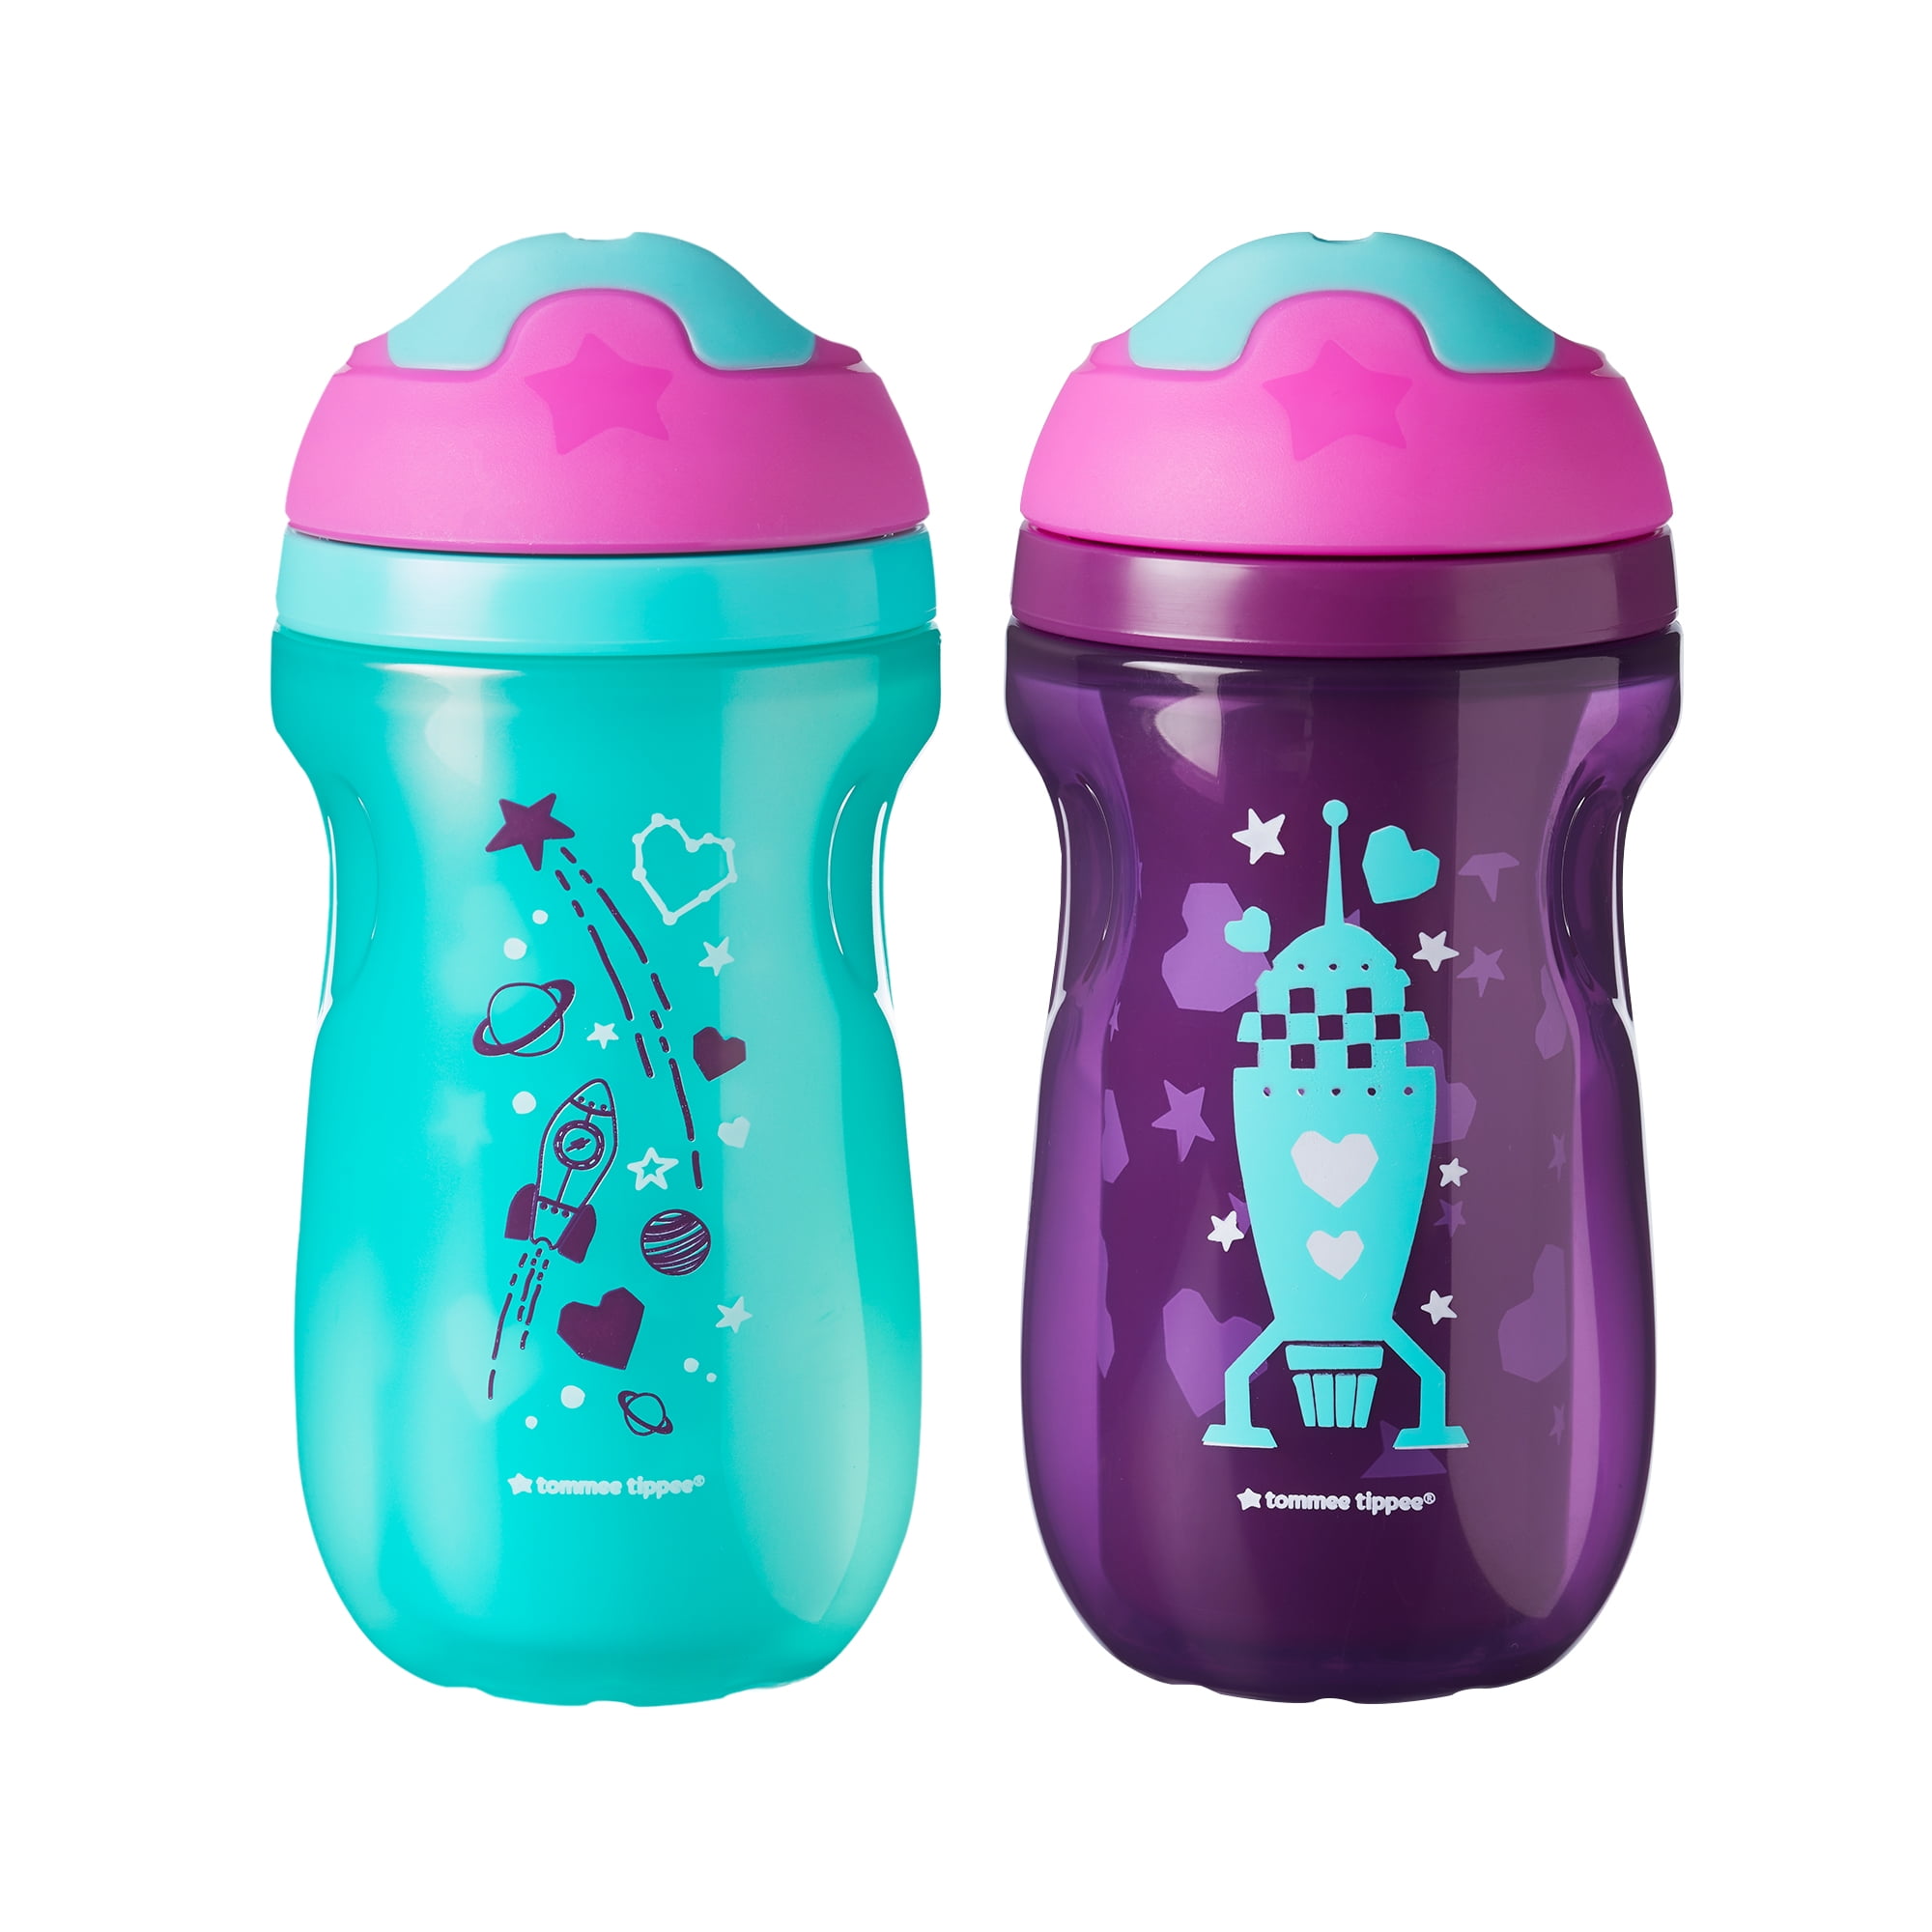 Tommee Tippee Insulated Sippee Toddler Sippy Cup, Spill-Proof, 2